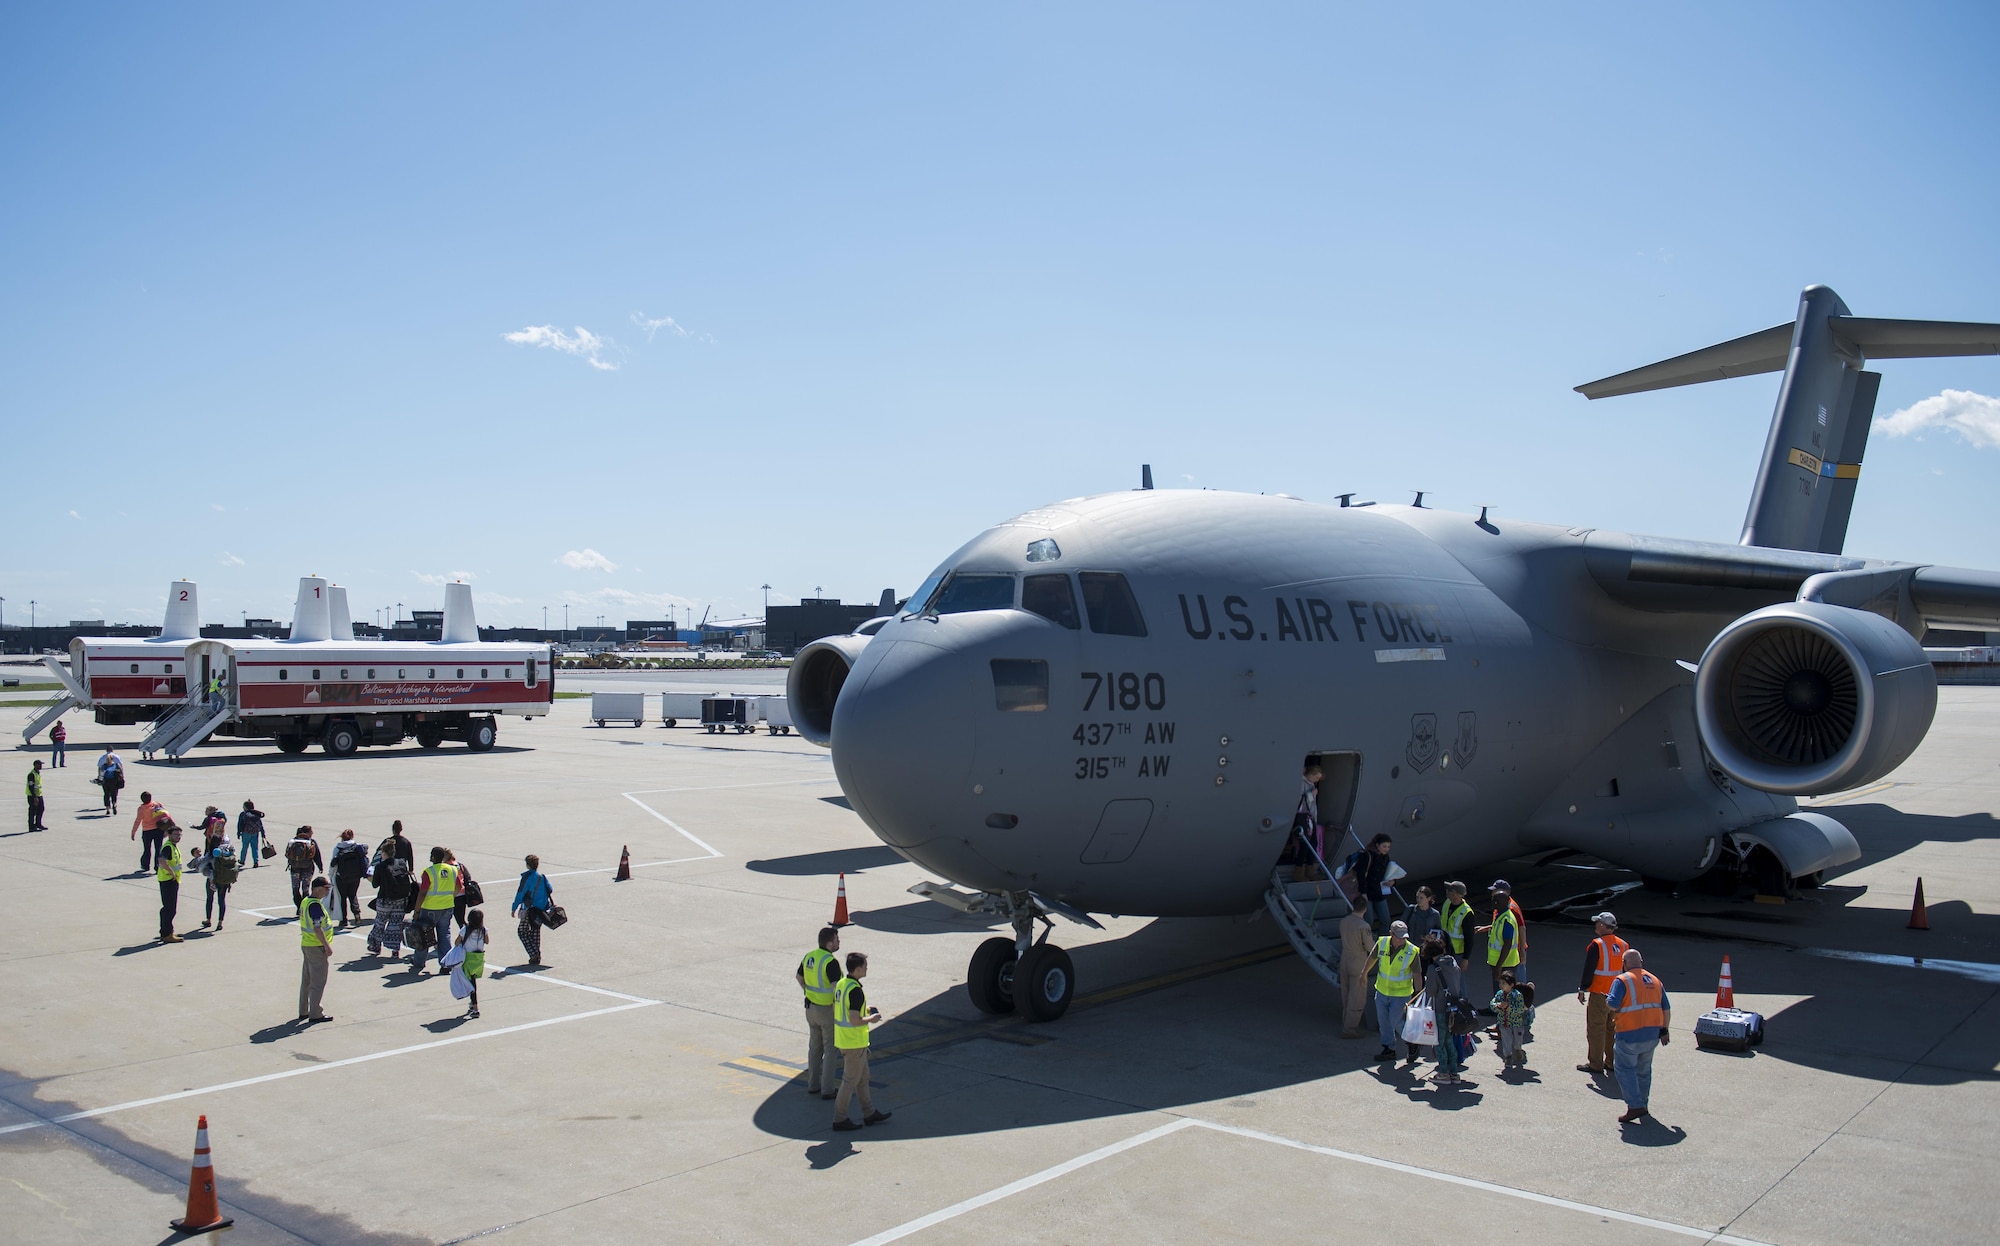 Dependents of military members from Incirlik Air Base, Turkey, disembark from a C-17 Globemaster III after landing at Baltimore Washington International Airport, Md., April 1, 2016. Defense Department dependents in Adana, Izmir and Mugla, Turkey, were given an ordered departure by the State Department and Secretary of Defense. The aircraft is assigned to the 437th Airlift Wing at Joint Base Charleston, S.C. (U.S. Air Force photo/Staff Sgt. Andrew Lee)